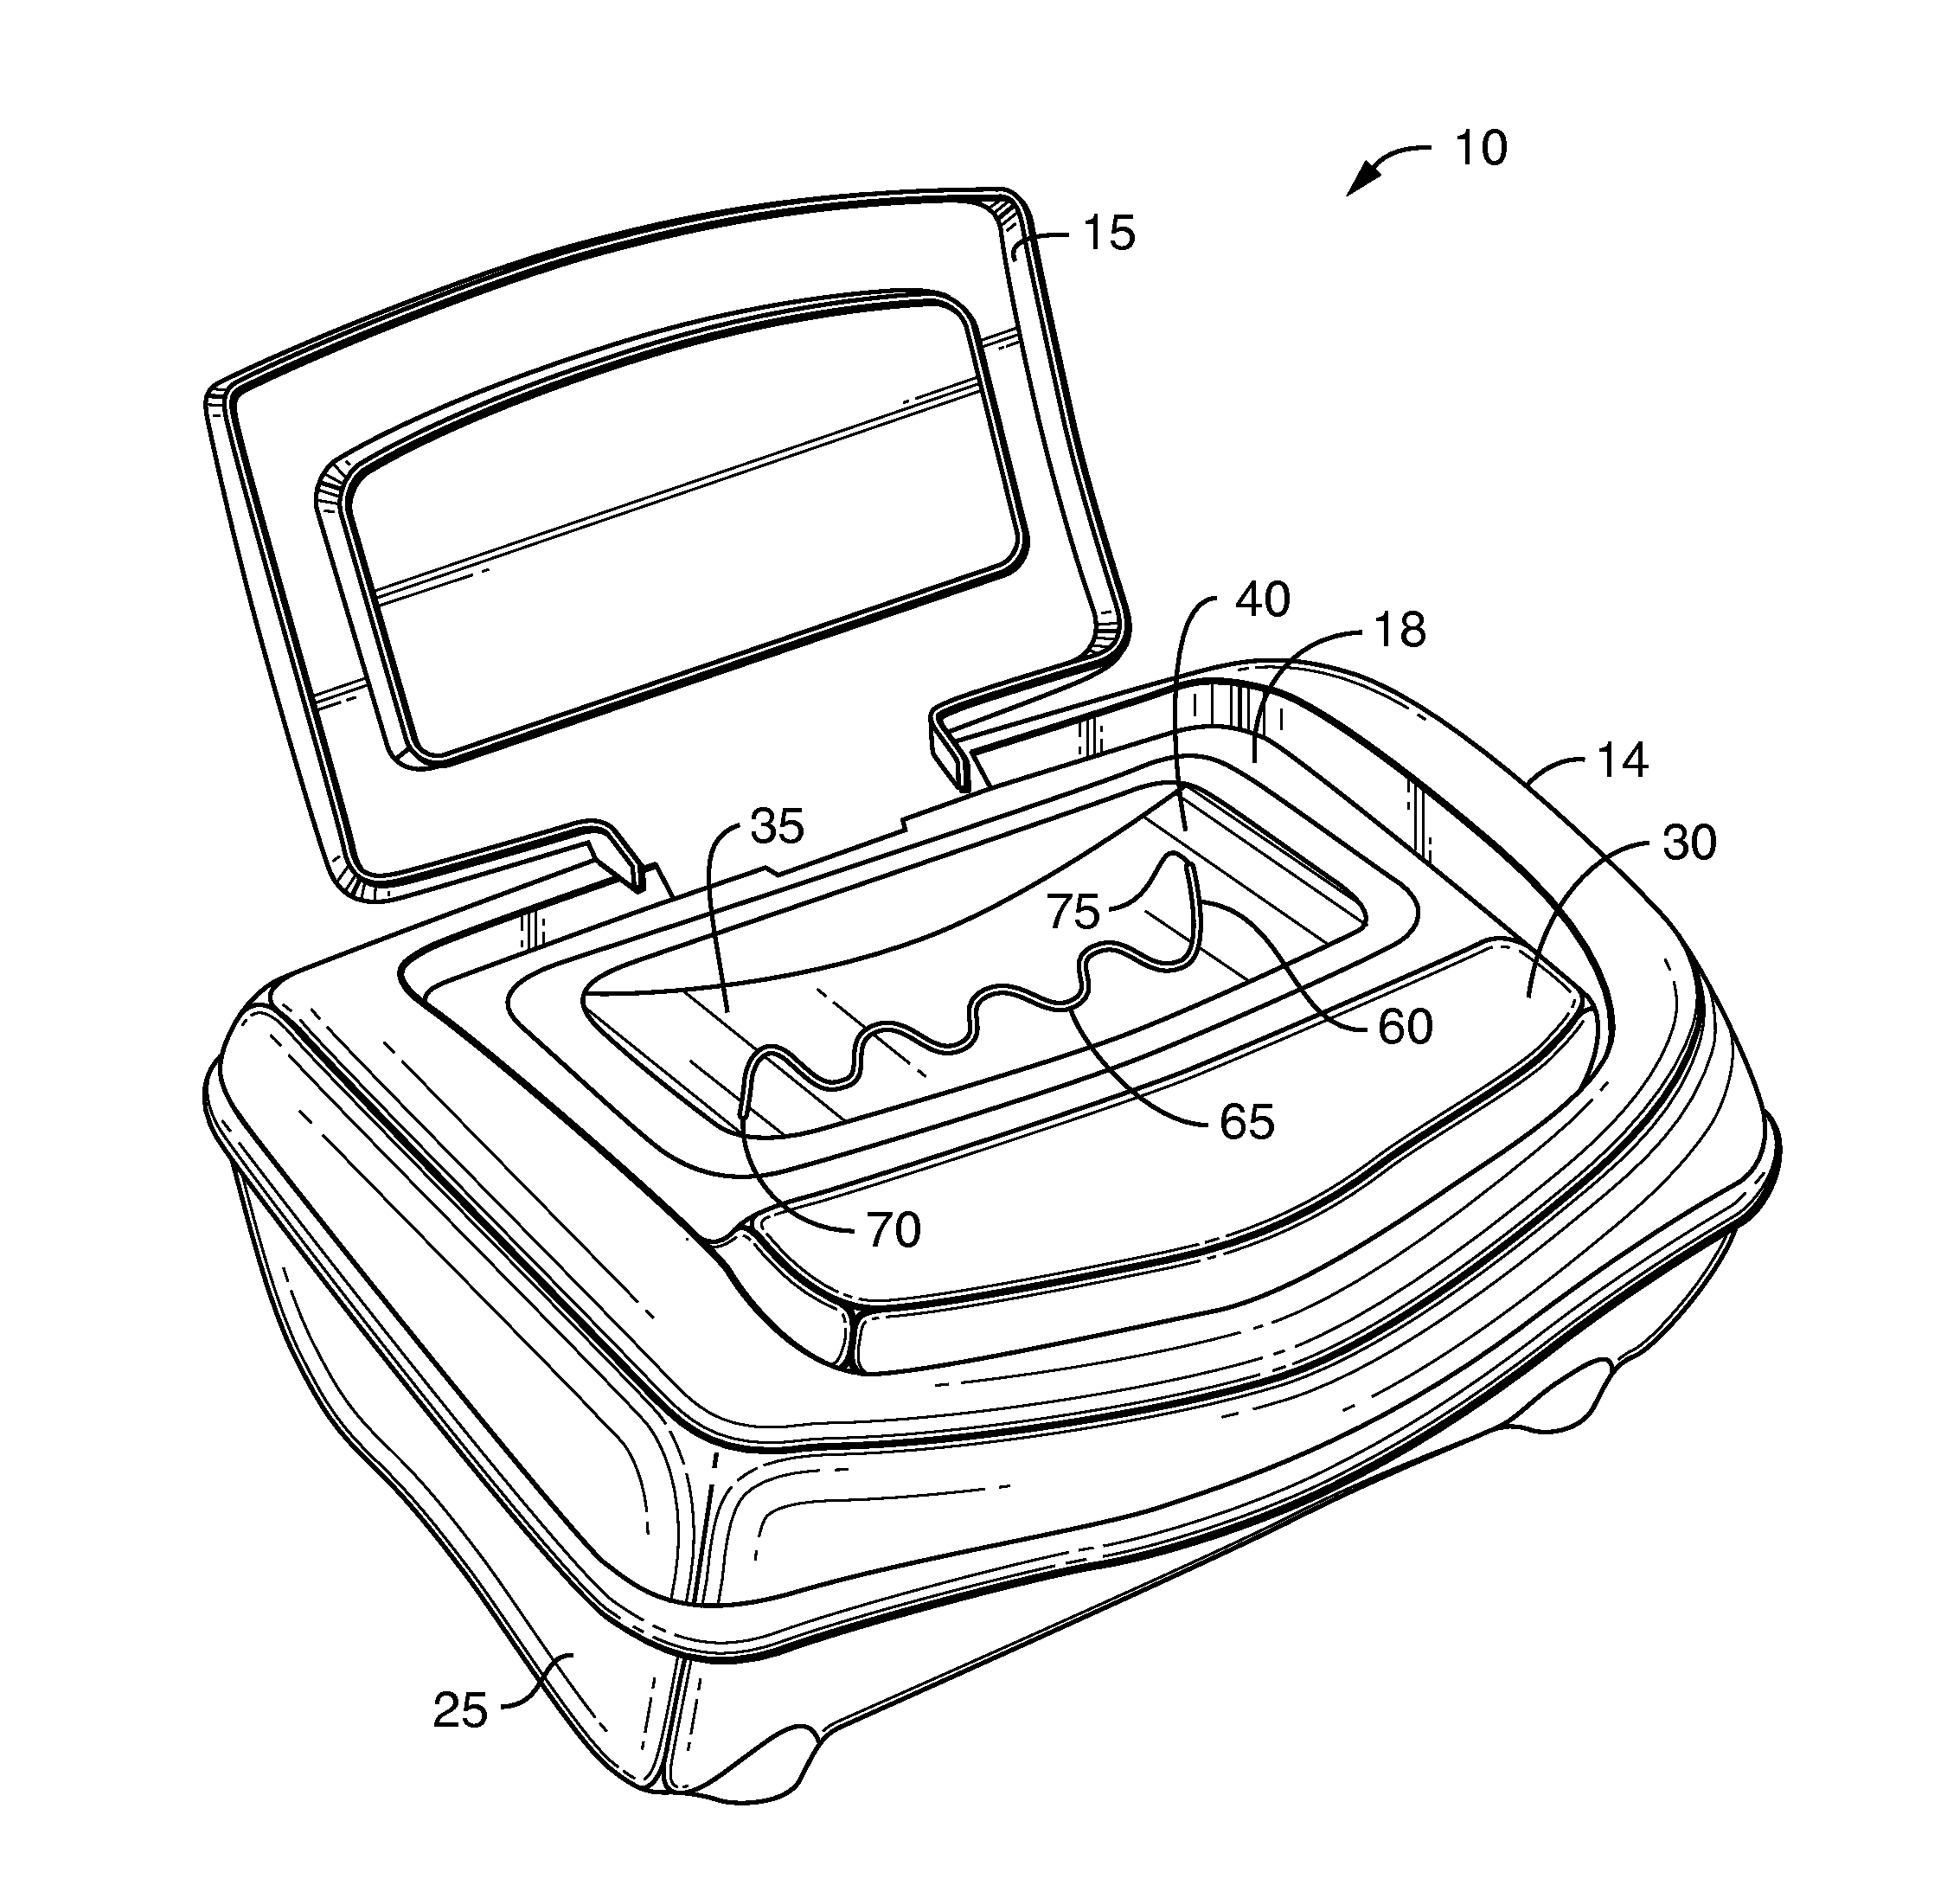 Wet Wipe Dispenser with Improved Arc-Shaped Dispensing Partition